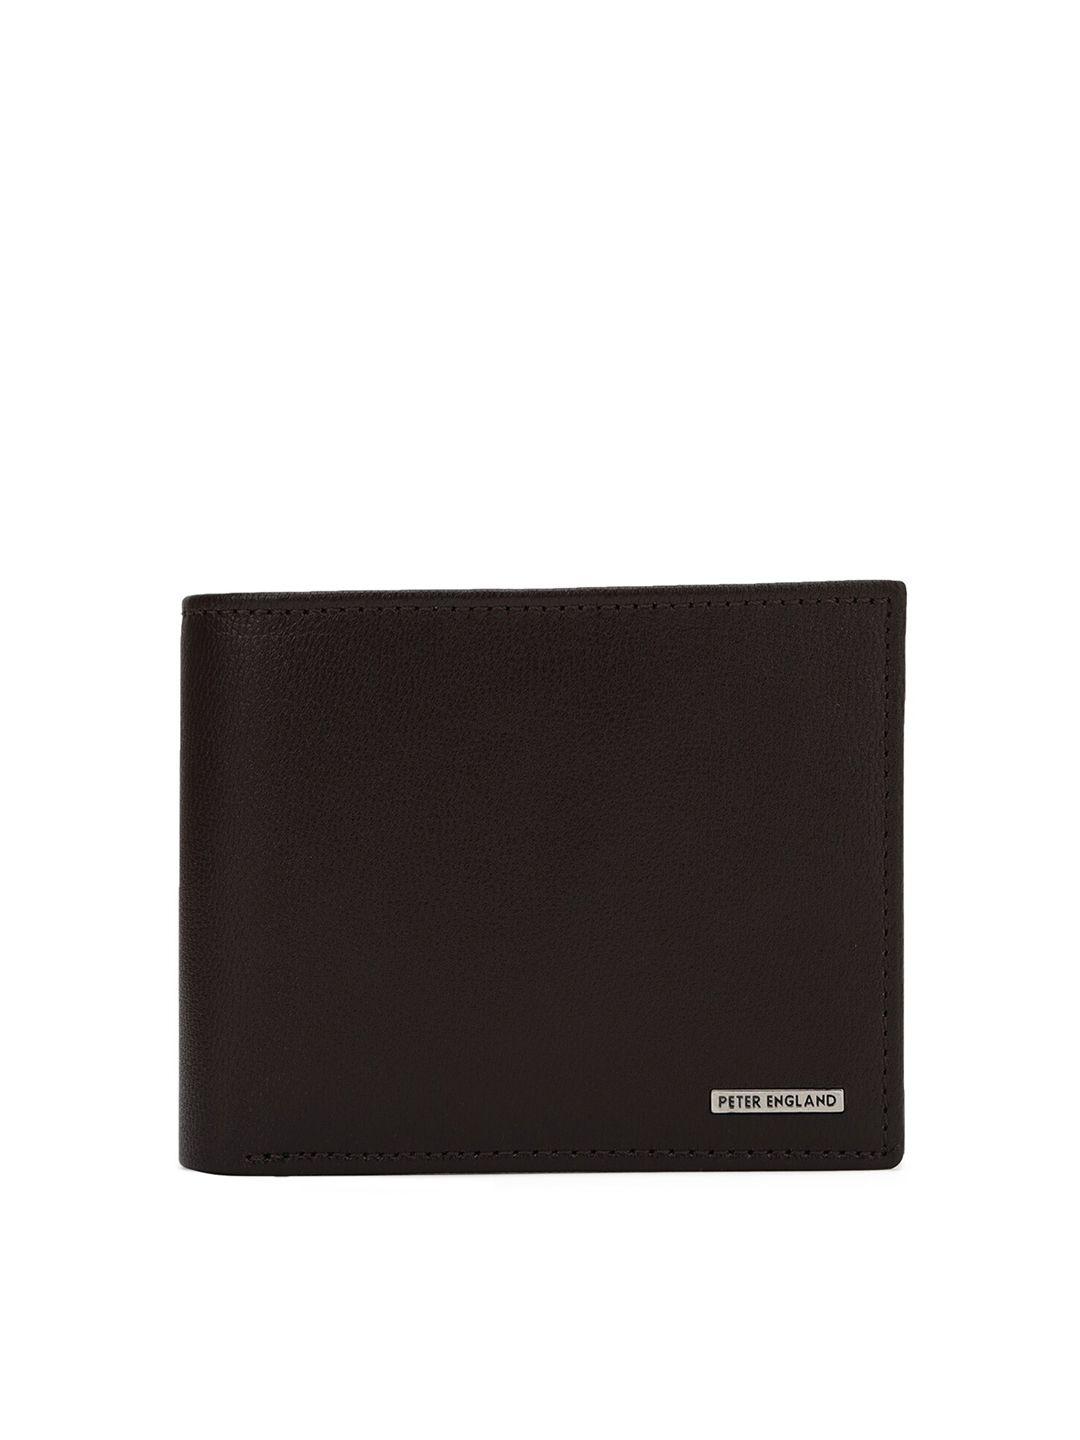 peter england men black solid leather two fold wallet